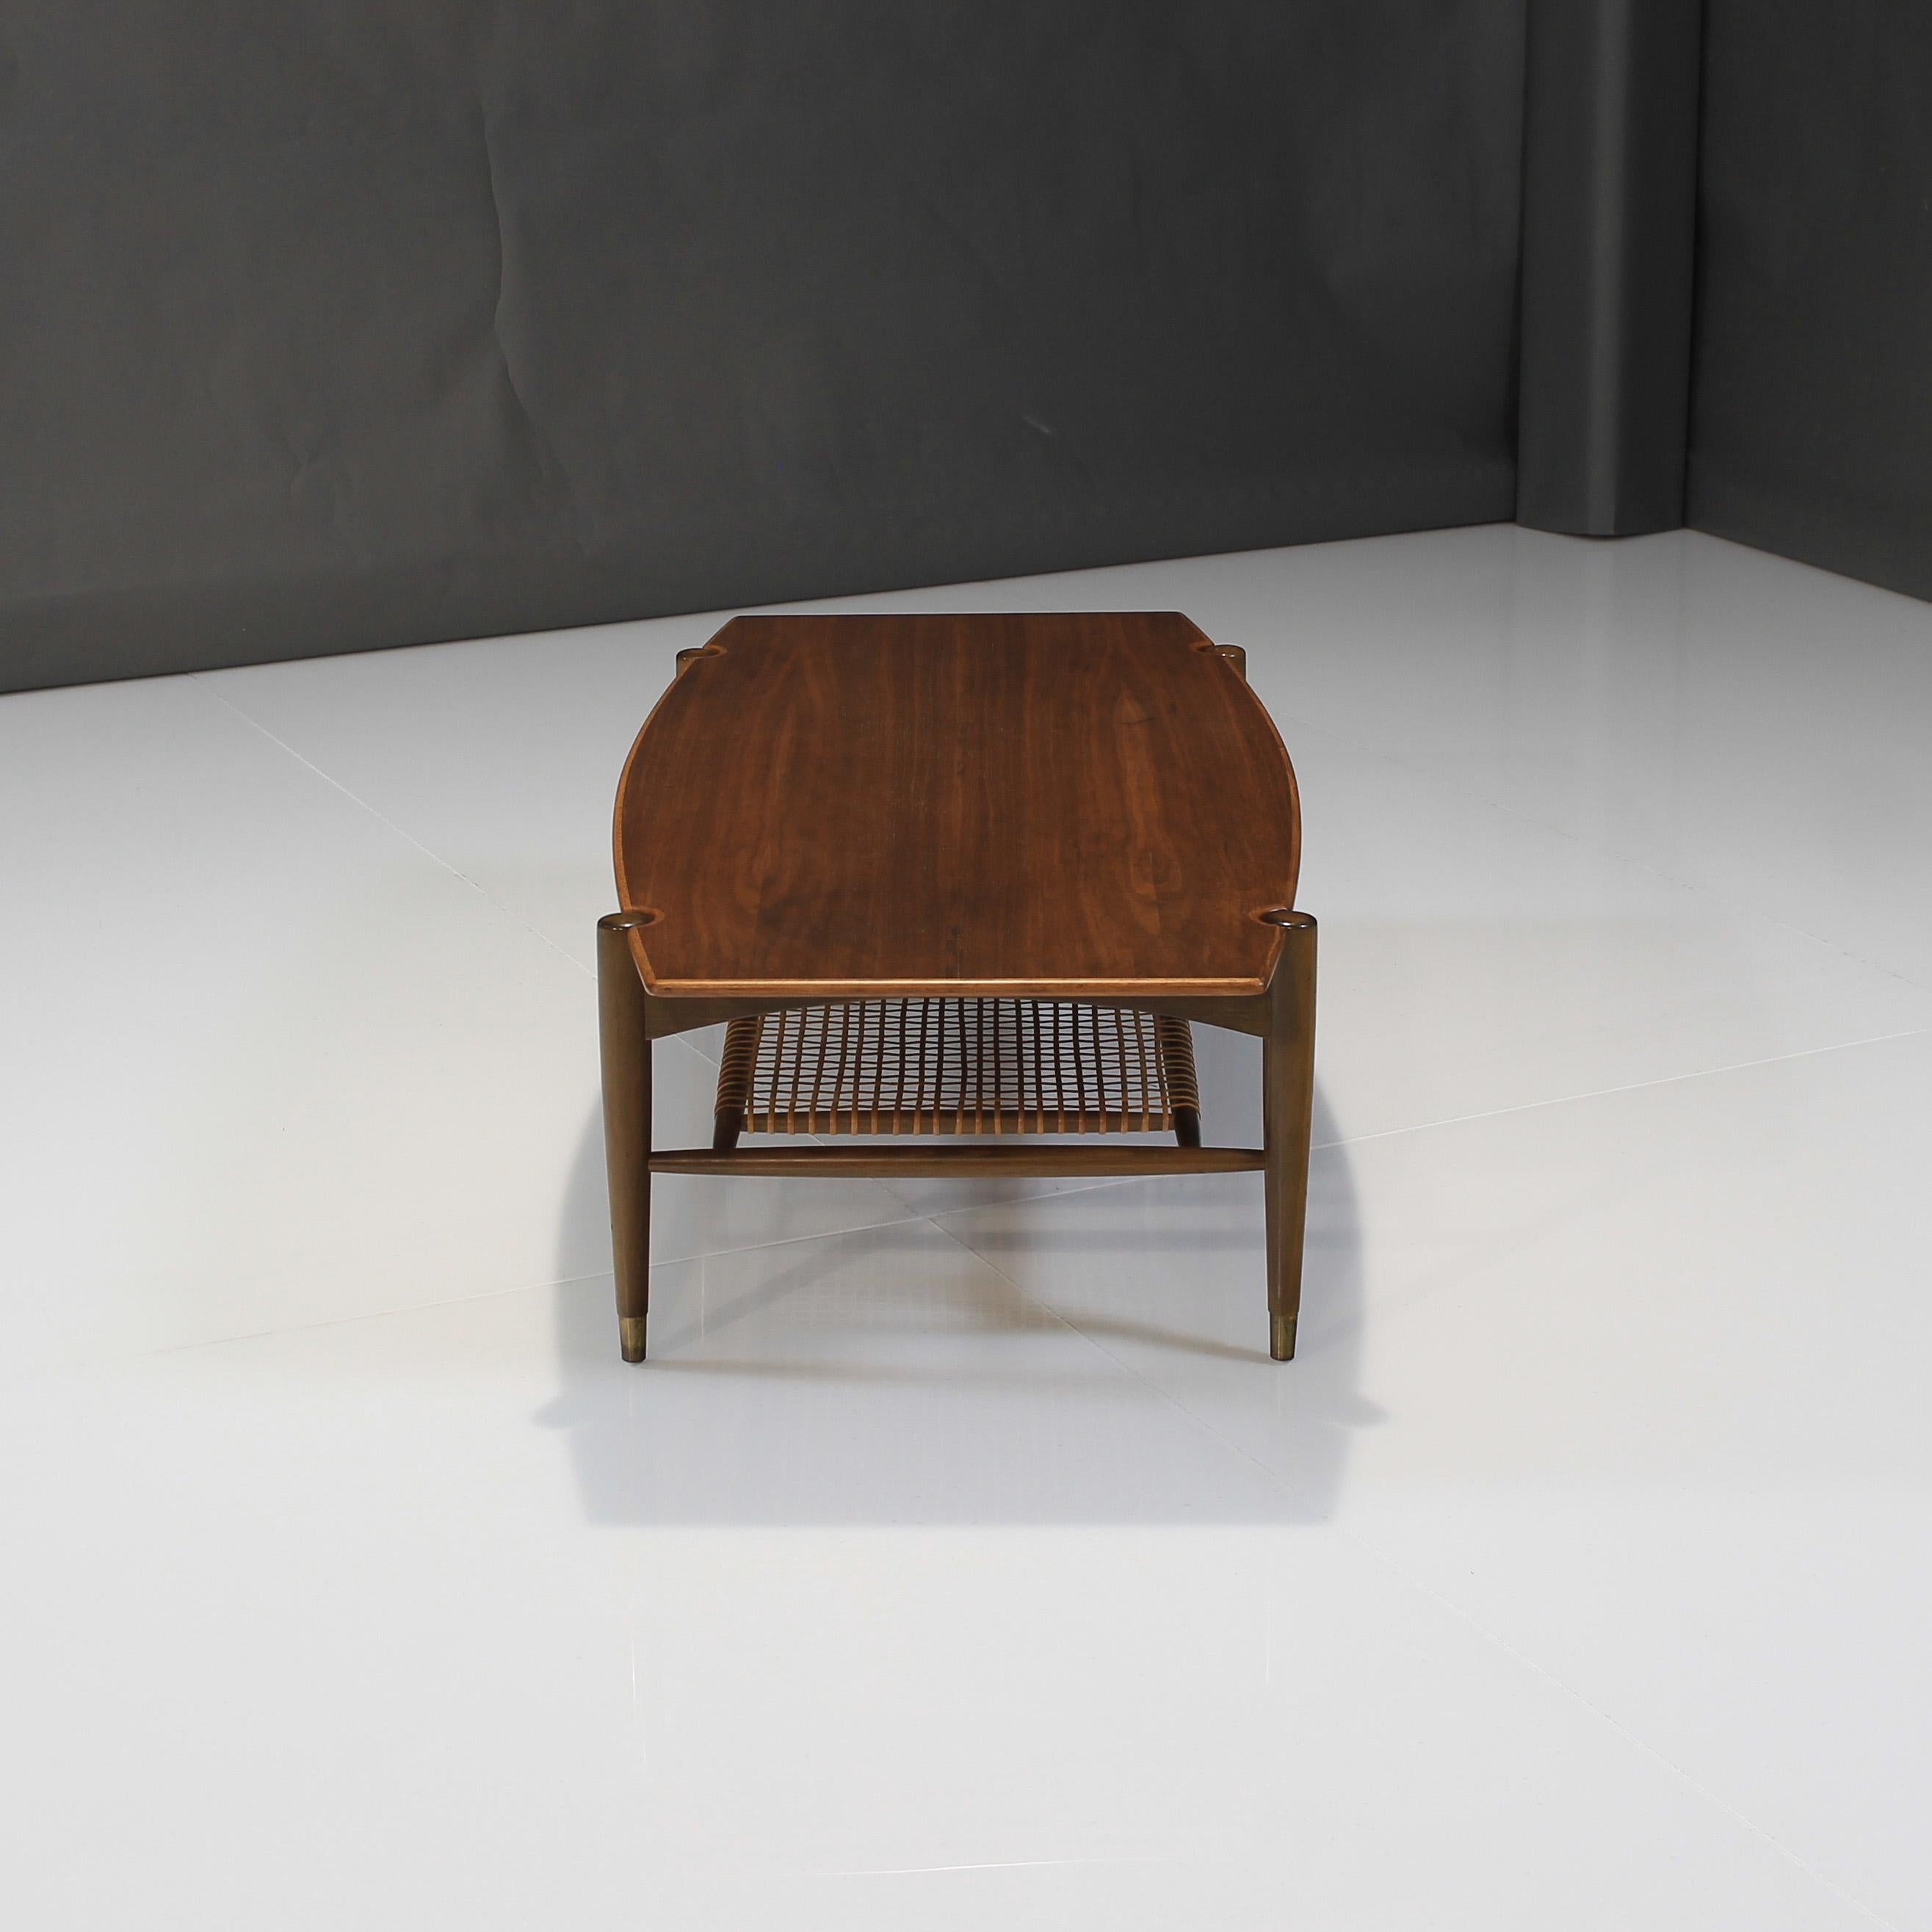 Oiled Mid-20th Century Teak and Cane Coffee Table by Folke Ohlsson